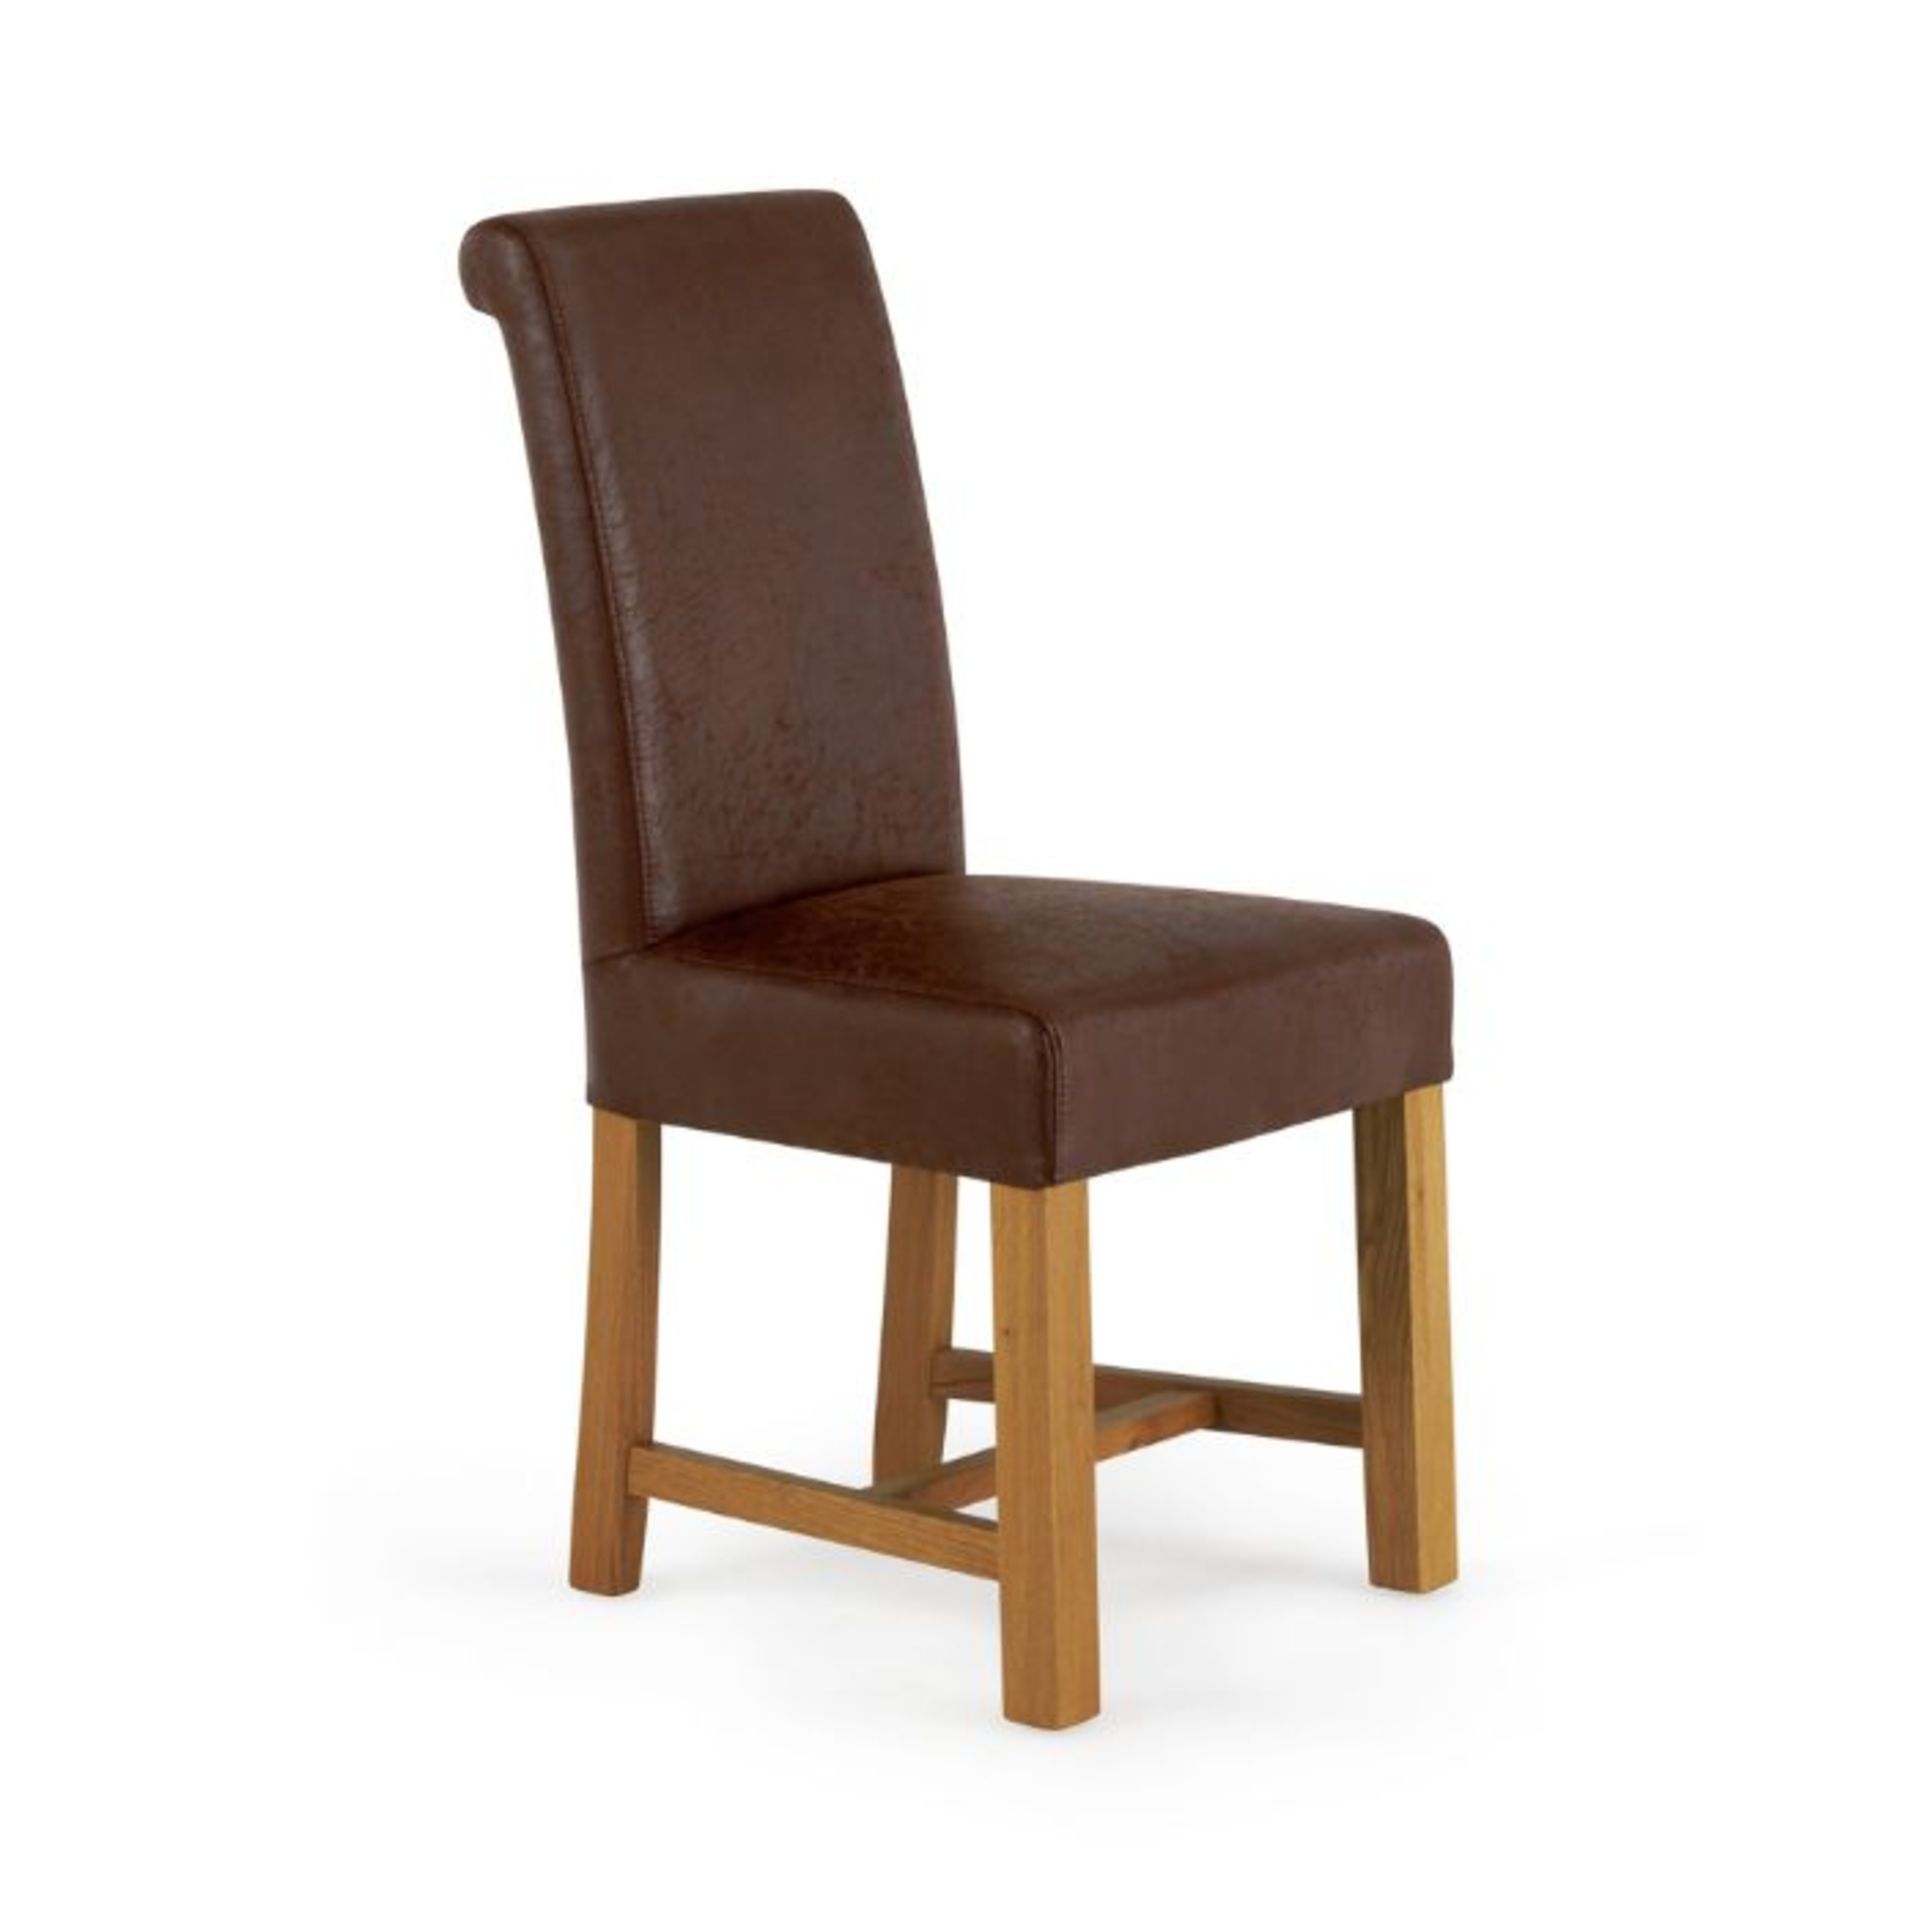 Oak Furnitureland Scroll Back Chair in Antiqued Brown Fabric with Solid Oak Legs RRP œ380.00 This - Image 3 of 3